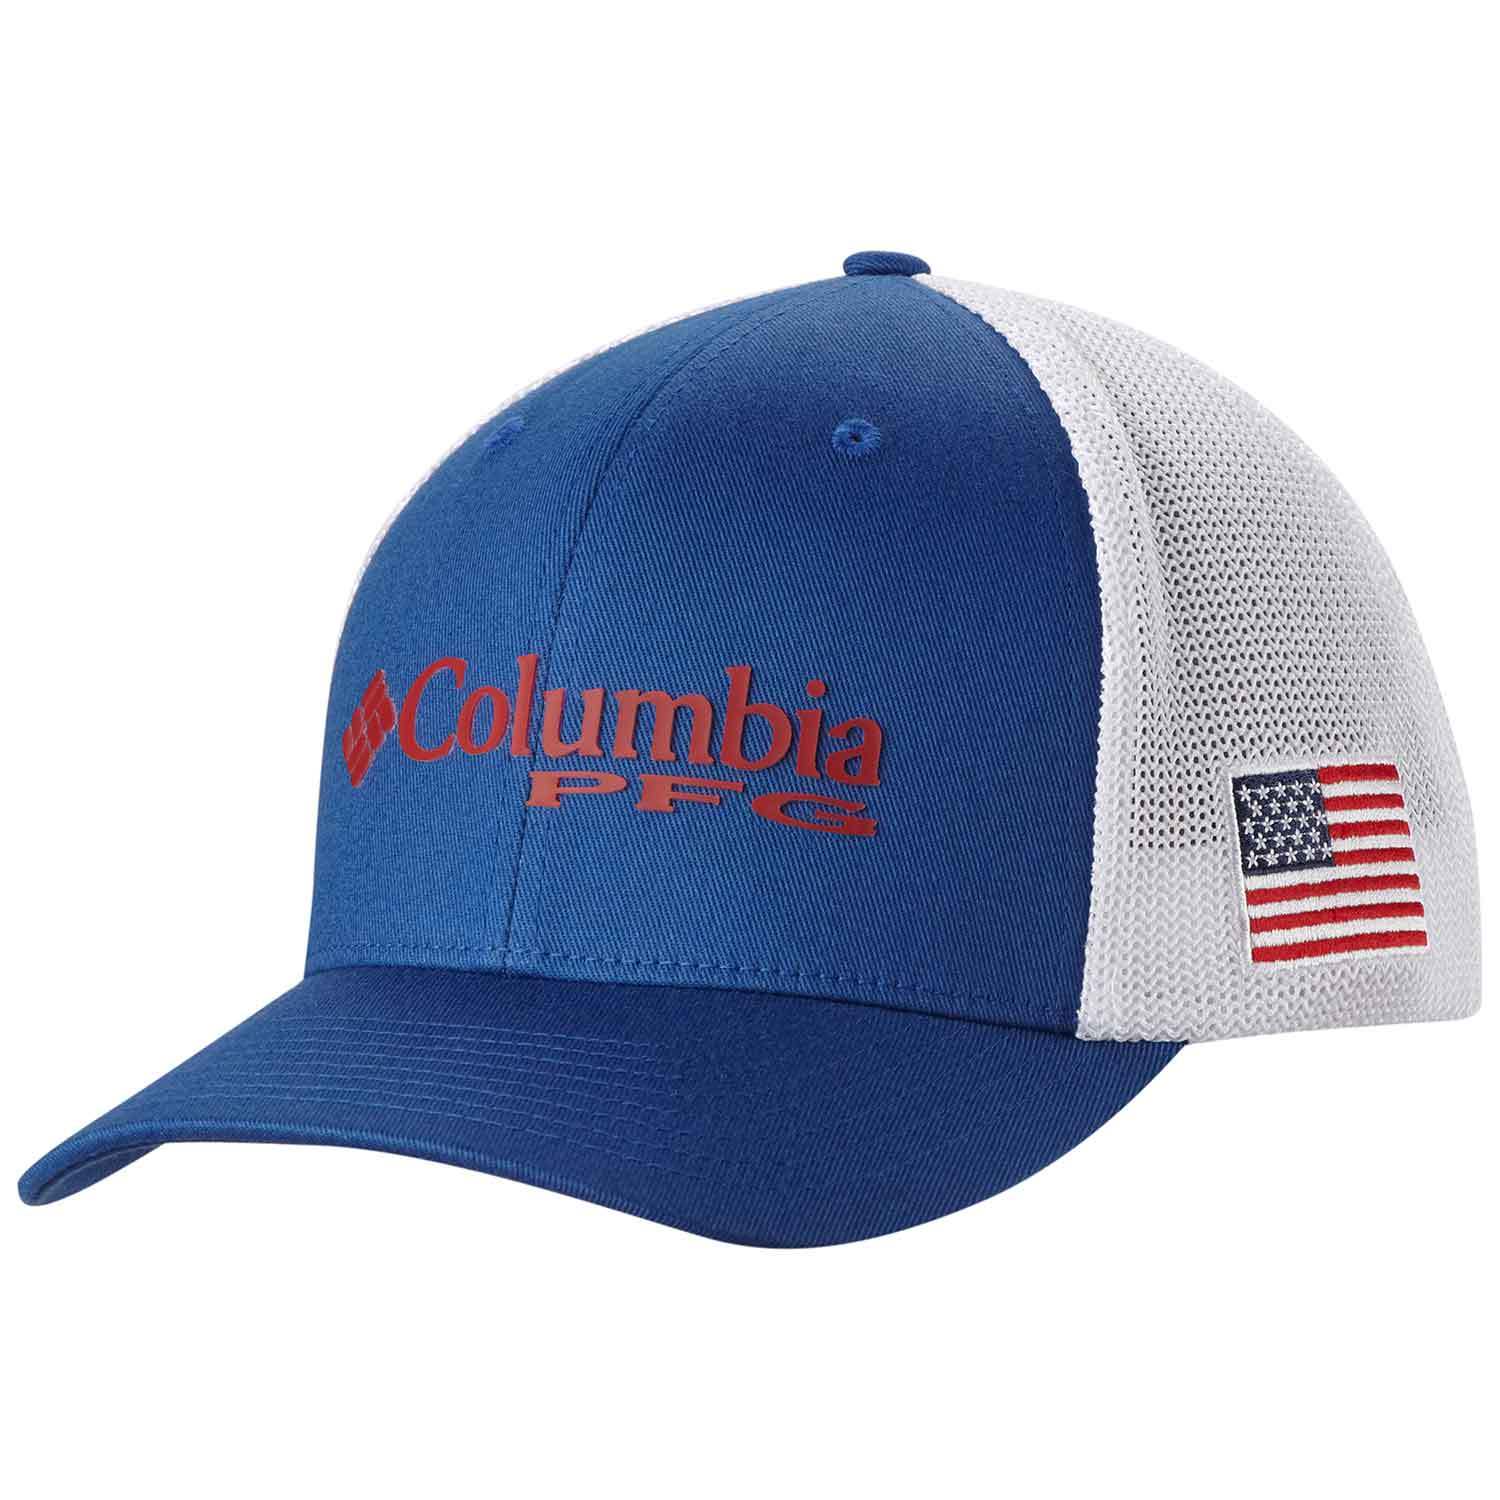 Columbia Rugged Outdoor™ Mesh Ball Cap - Accessories, Columbia